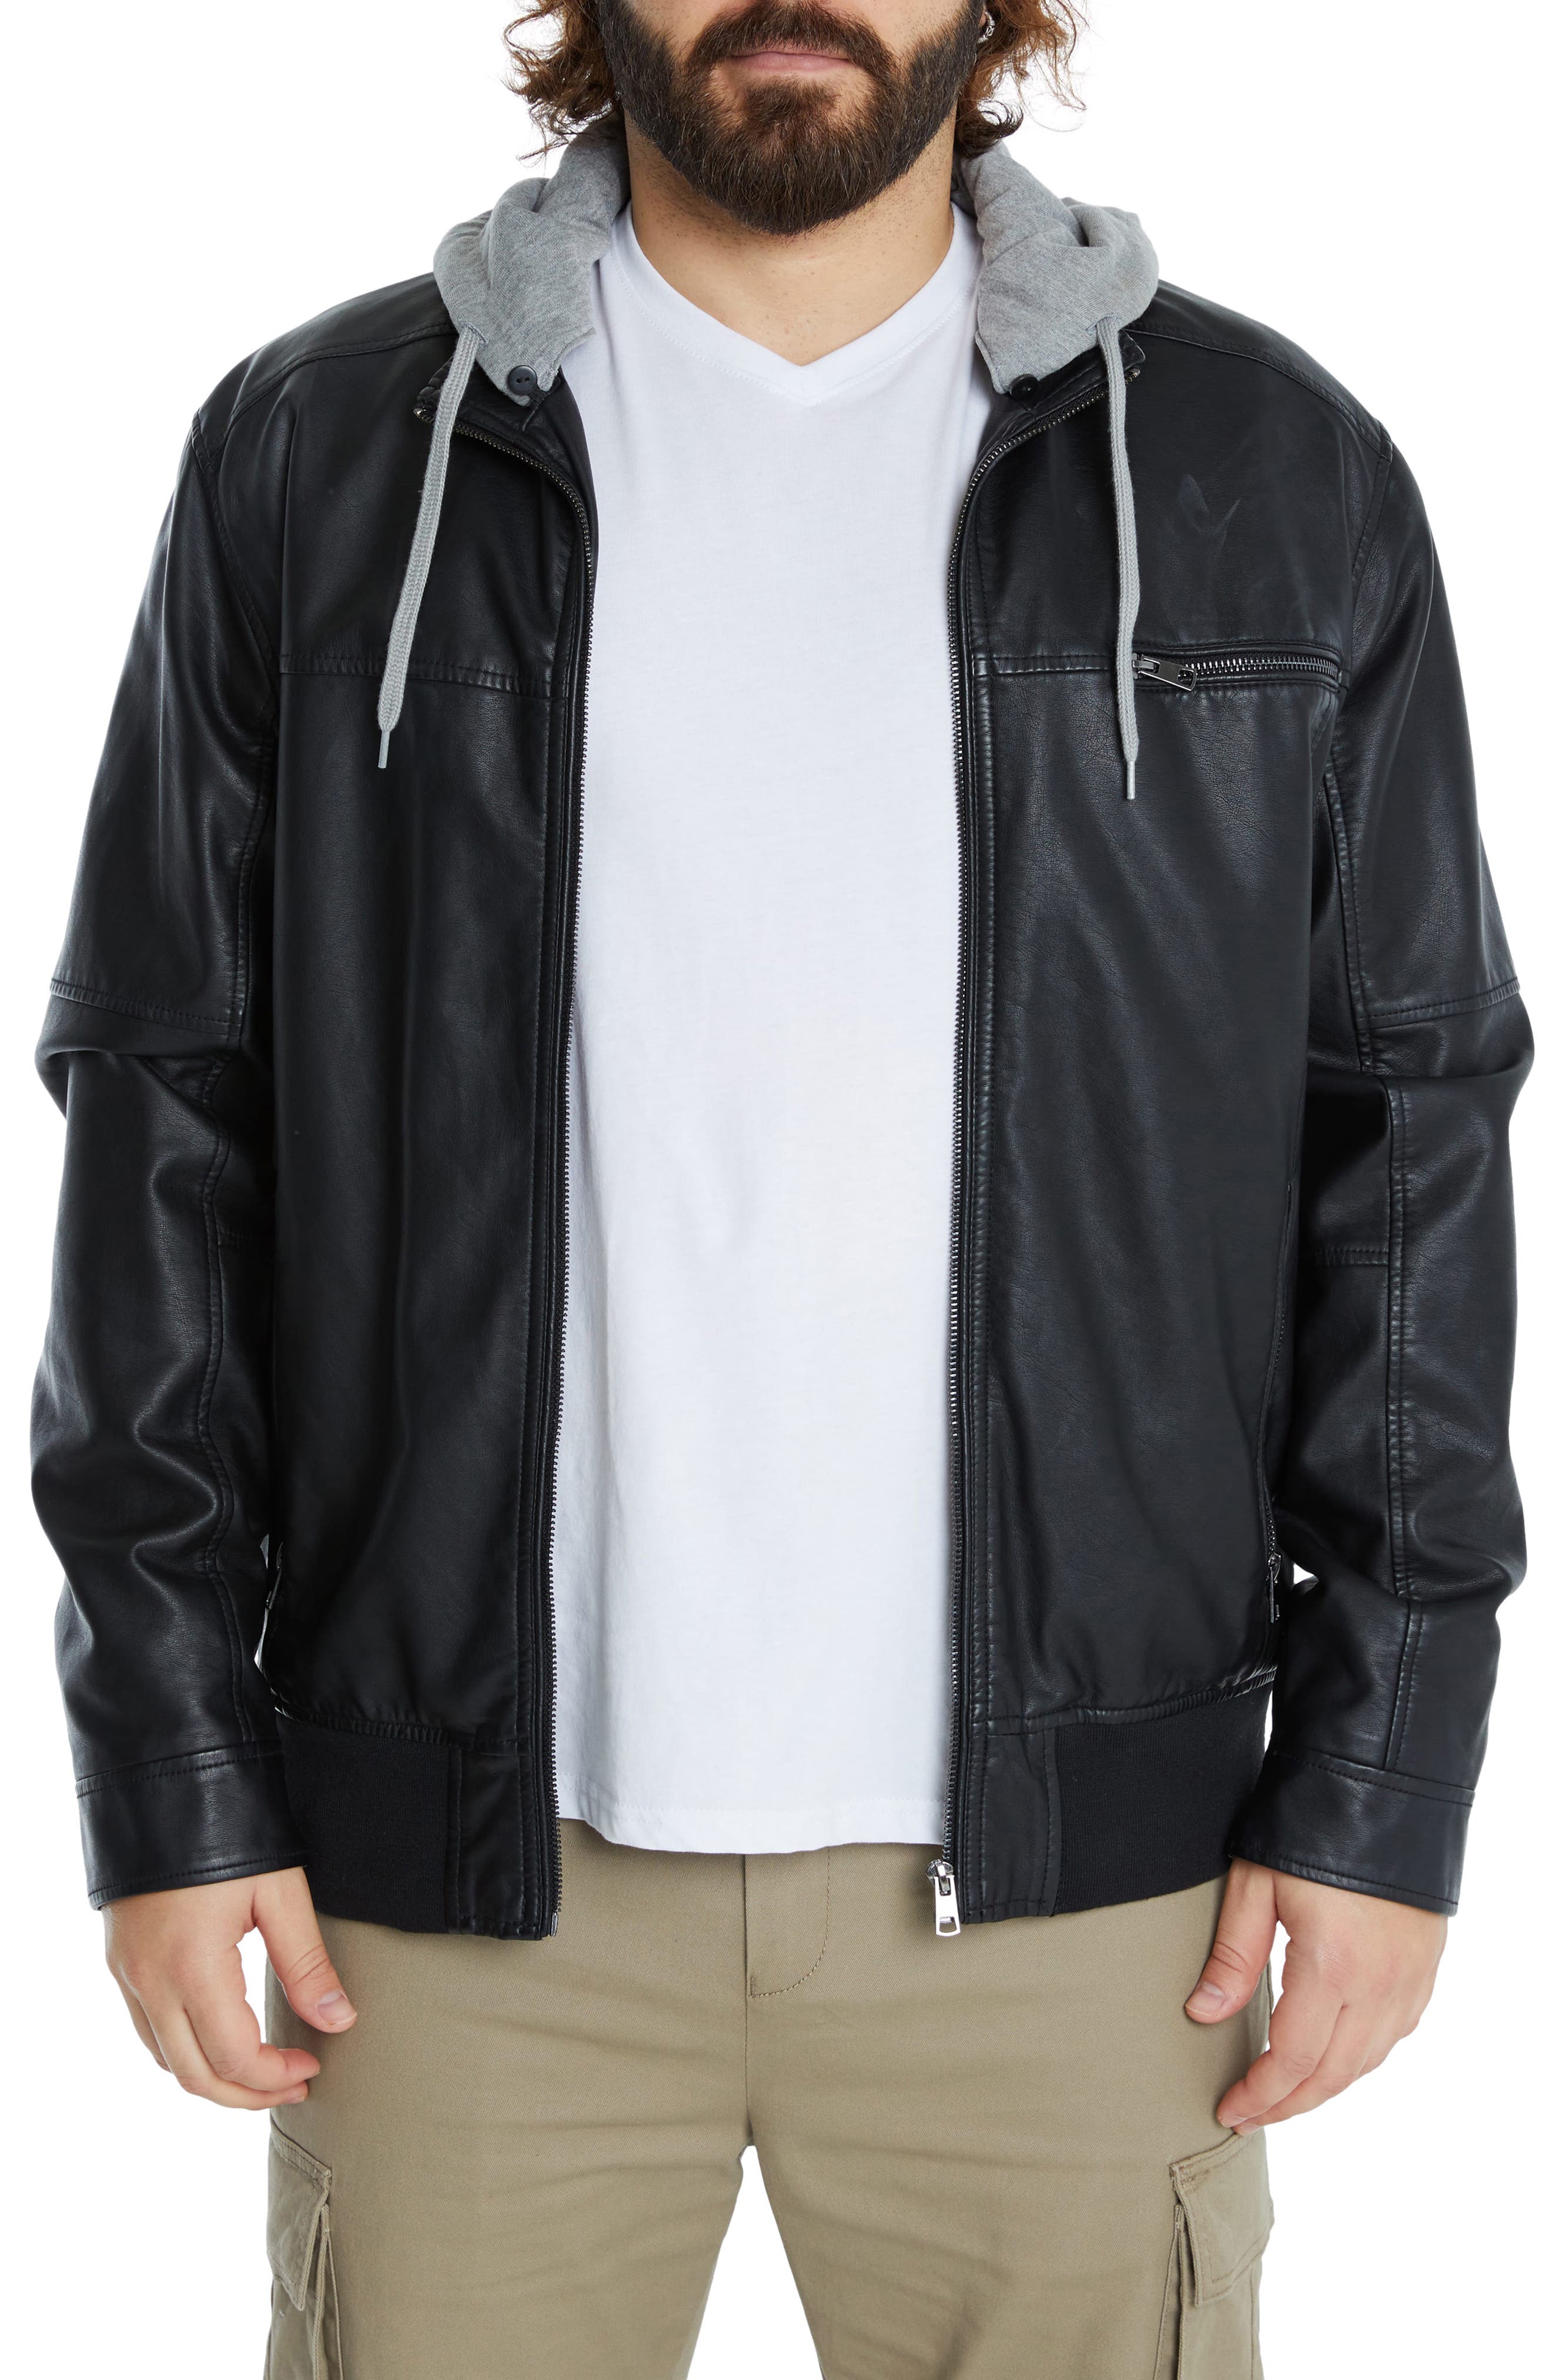 Johnny Bigg Damon Hooded Faux Leather Jacket in Black at Nordstrom